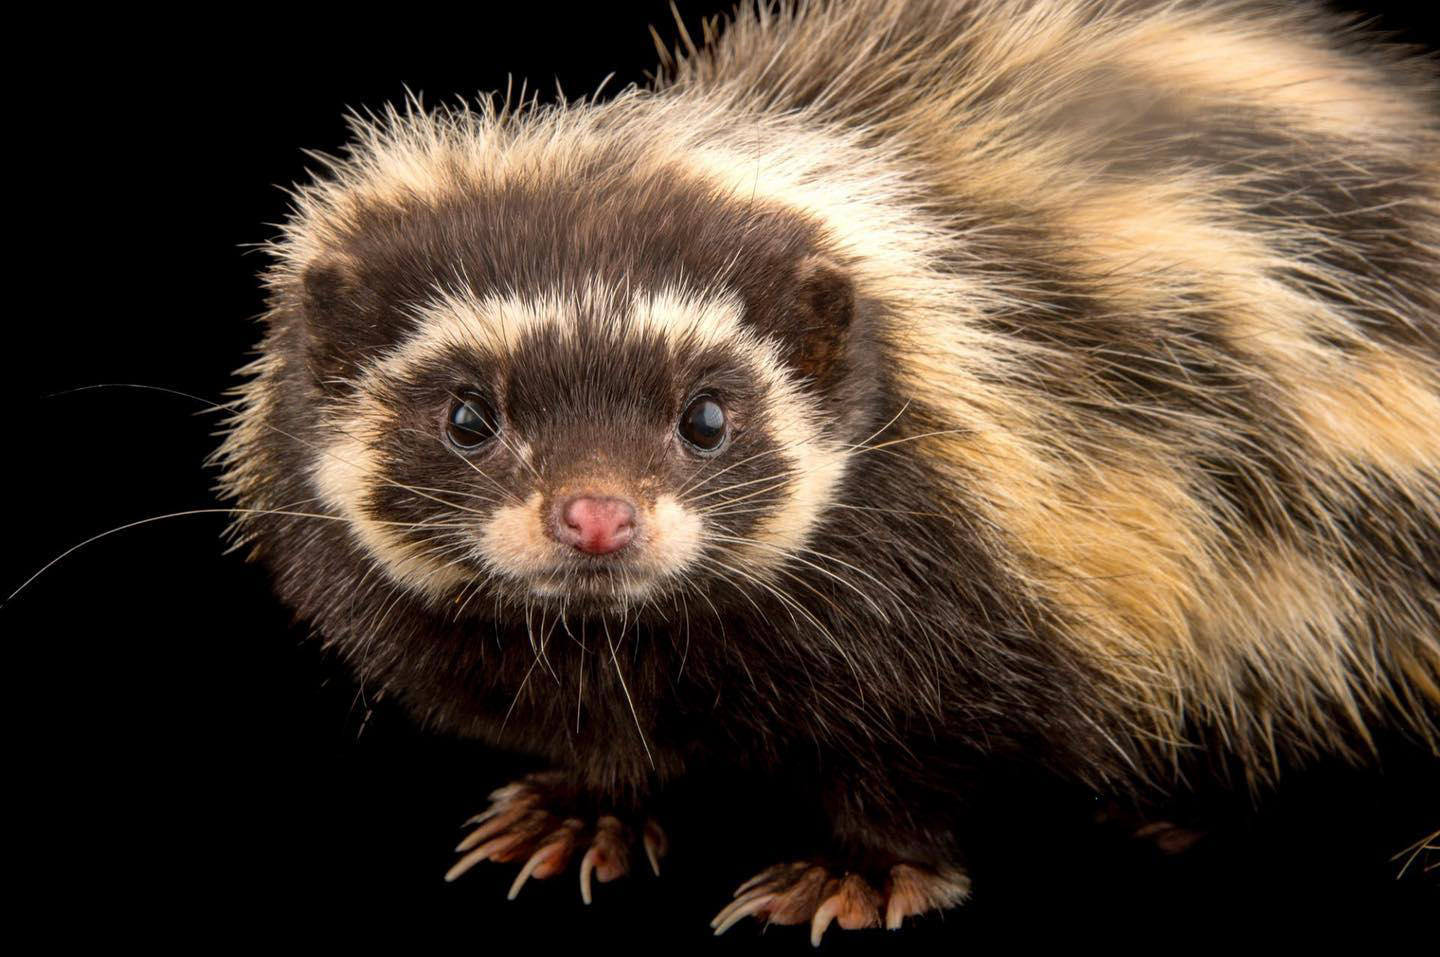 image  1 Joel Sartore- Photo Ark - Saharan striped polecats like this one #zooplzen thrive across much of Nor